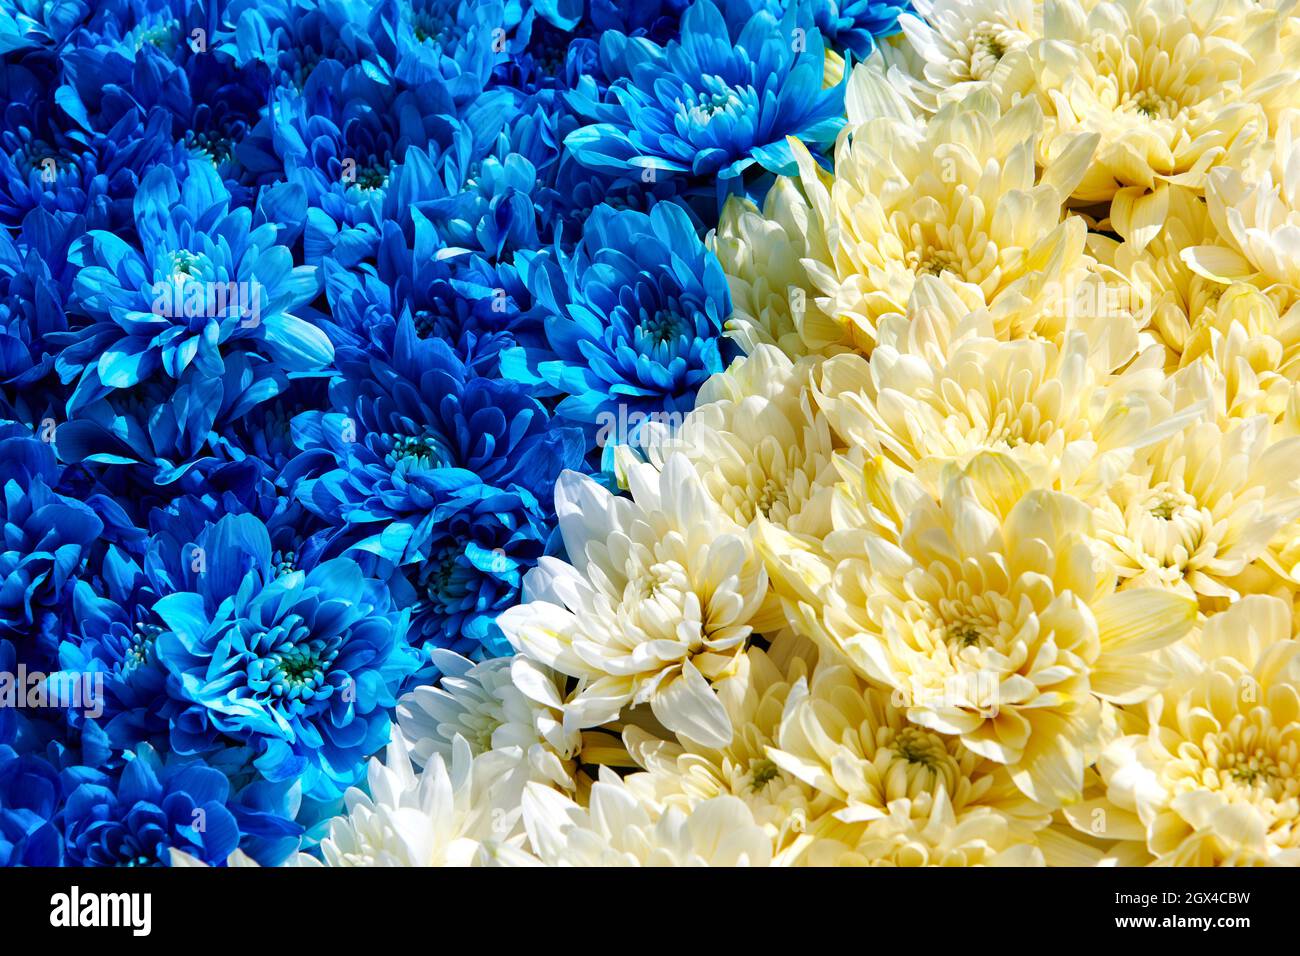 Blue and yellow chrysanthemums  background. Huge flowers bouquet.  View from above. Colour contrast. Closeup horizontal photo. Stock Photo